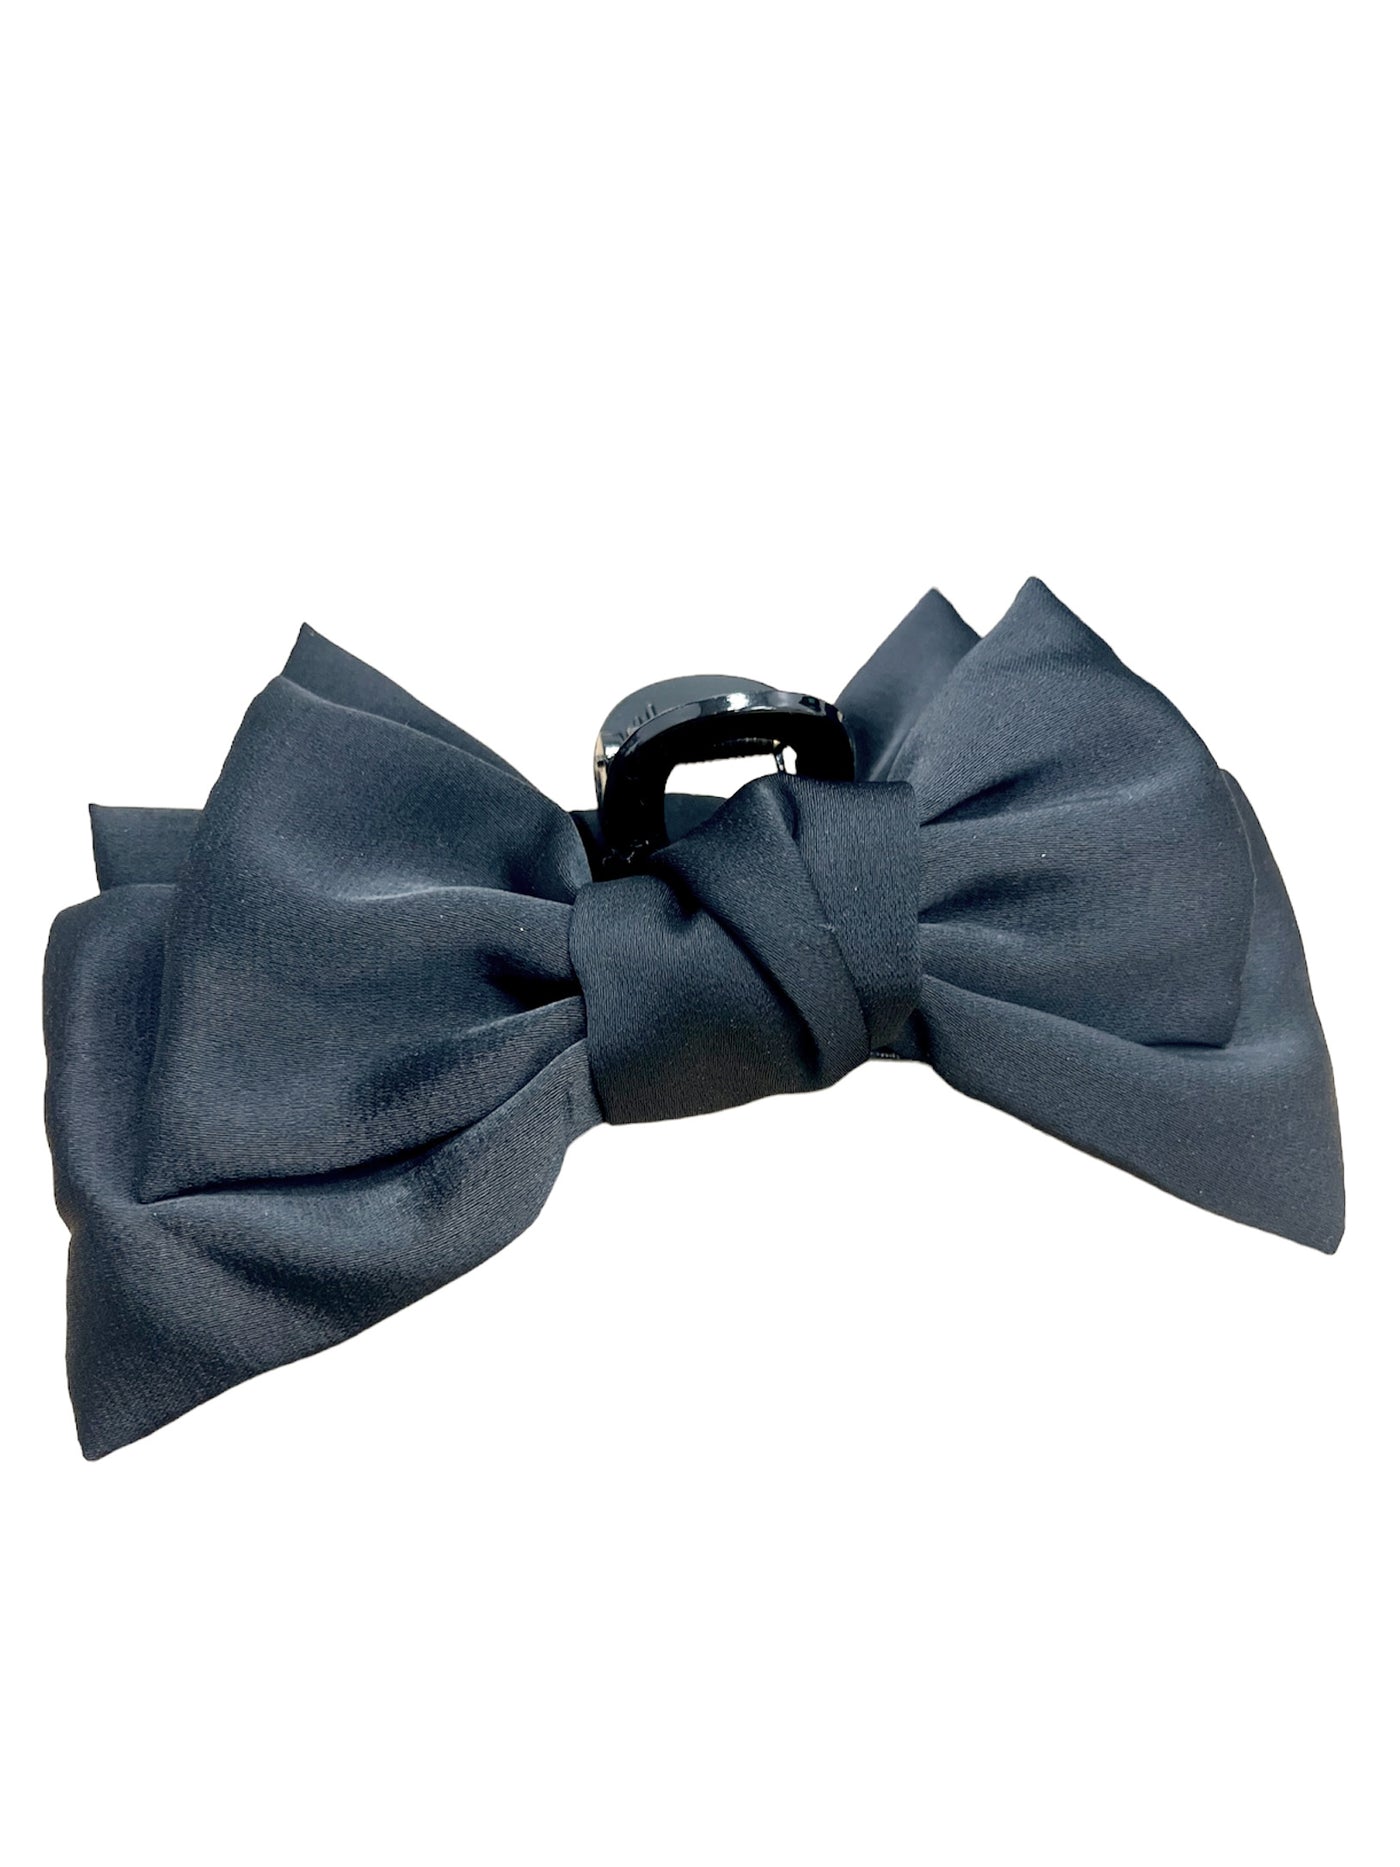 Bow Hairbow Claw Clip